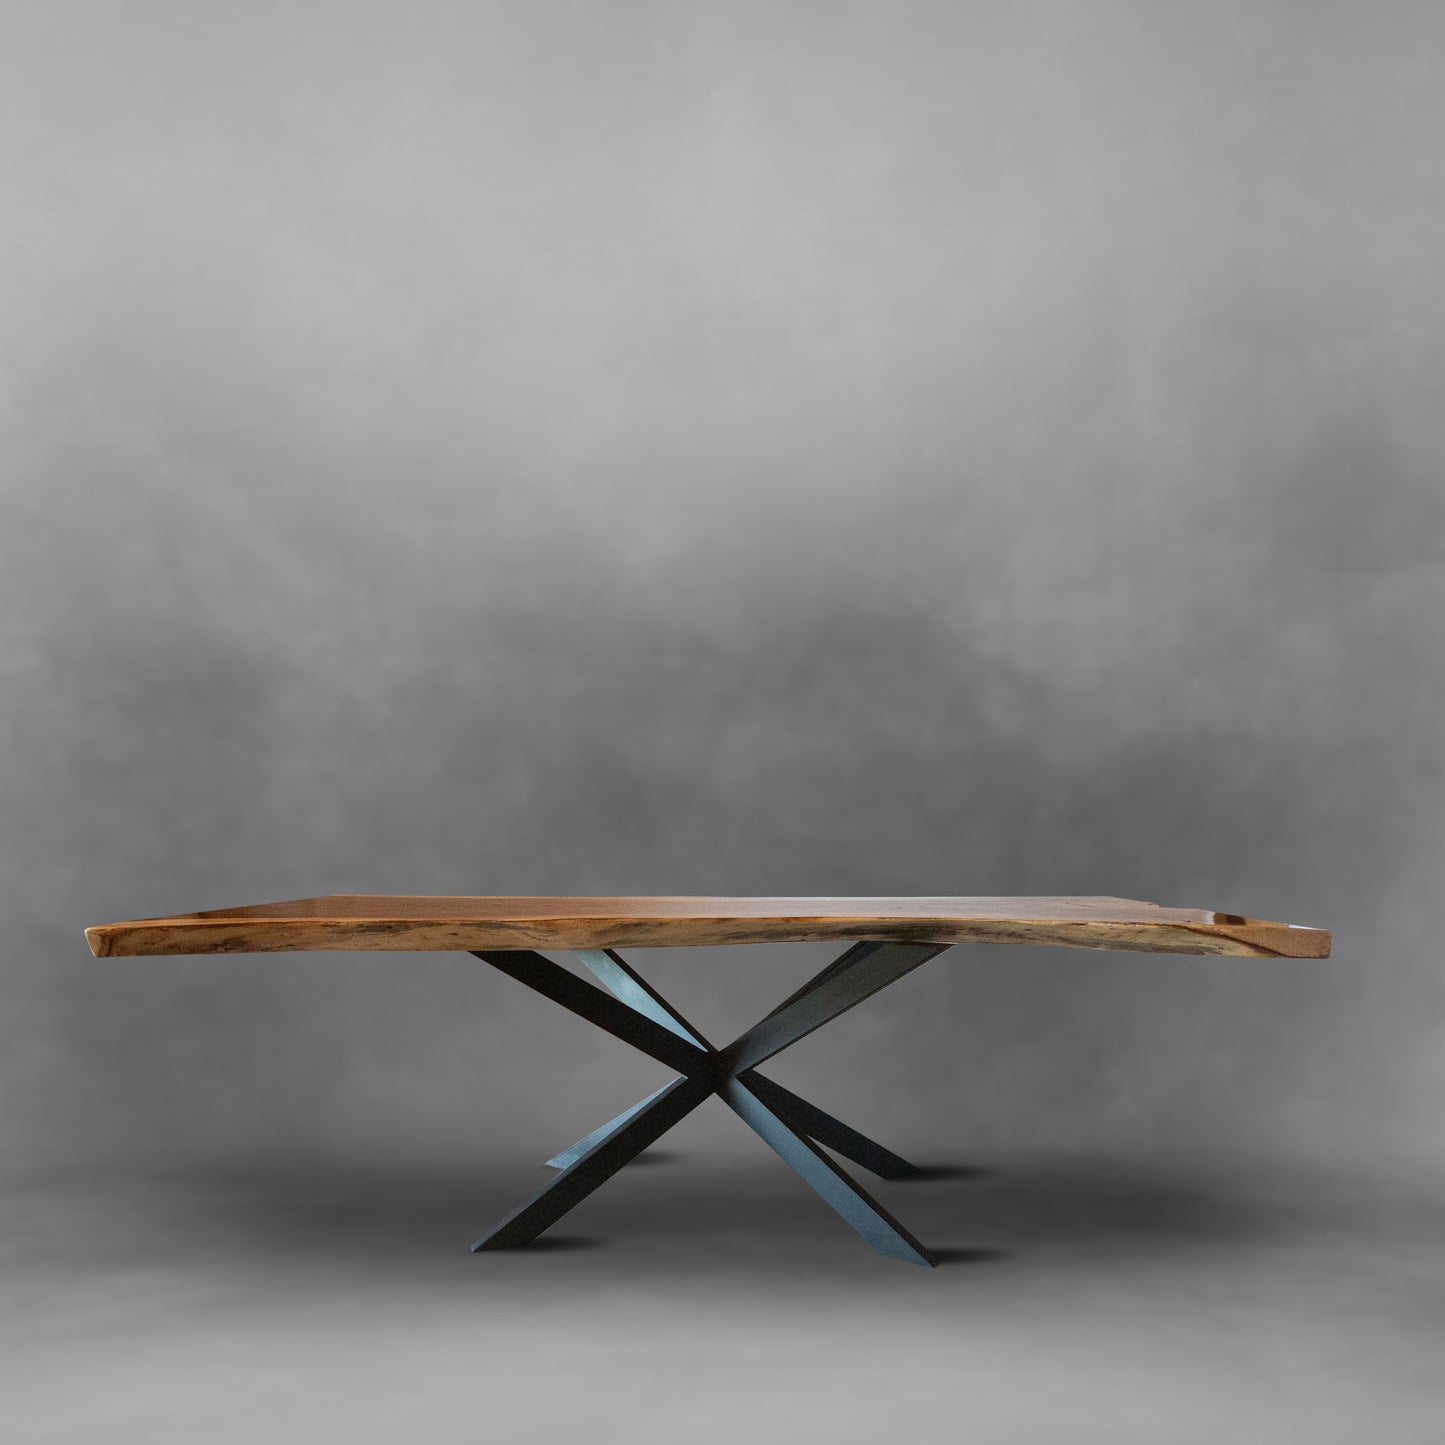 Sophisticated live age dinning parota or acacia table, solid wood